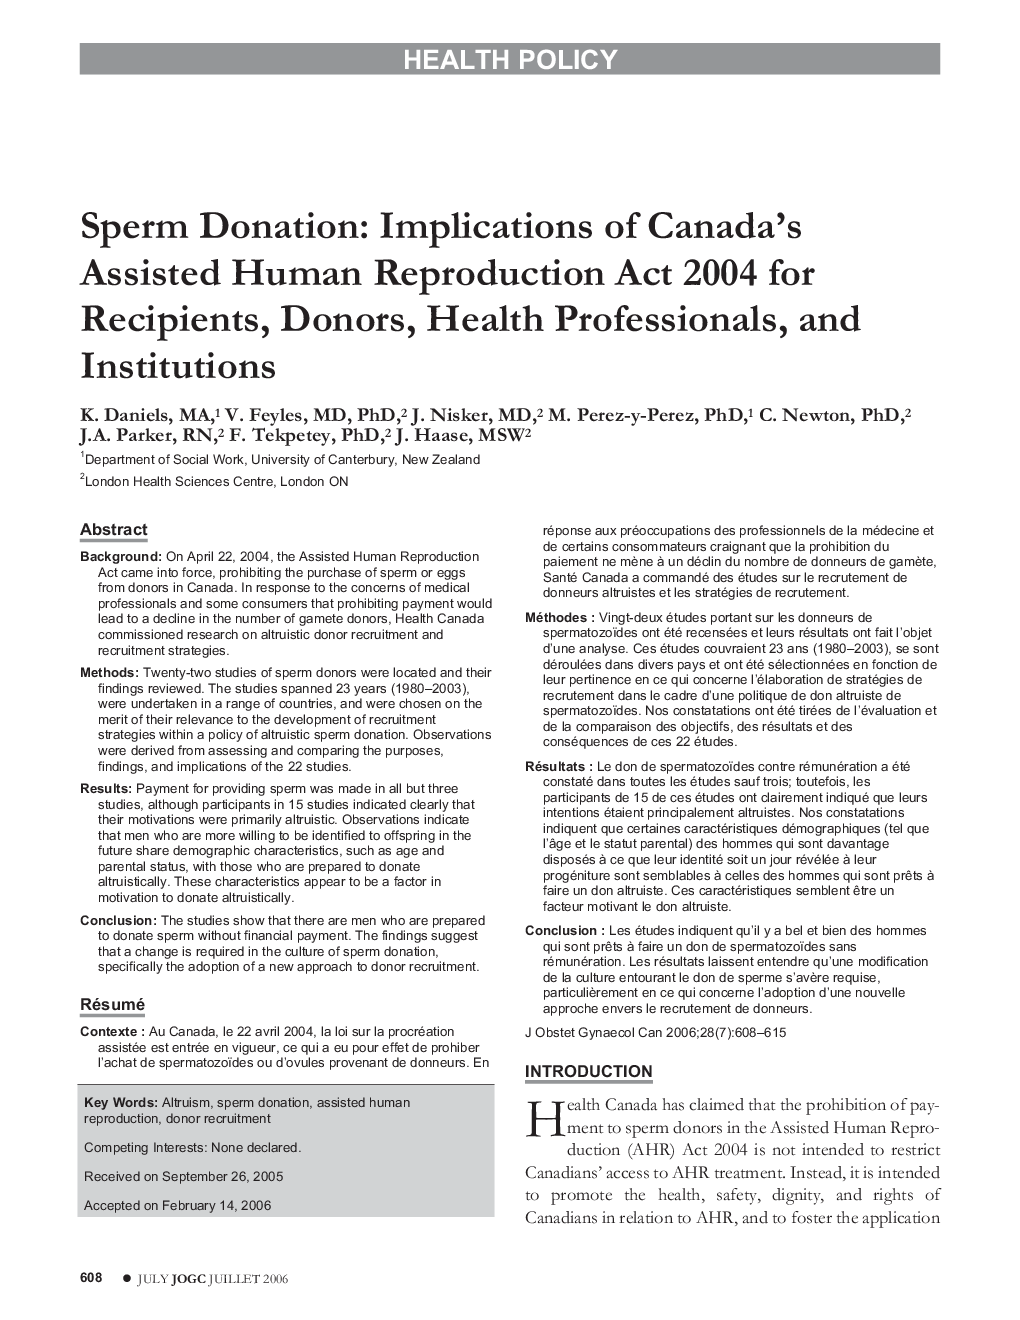 Sperm Donation: Implications of Canada's Assisted Human Reproduction Act 2004 for Recipients, Donors, Health Professionals, and Institutions